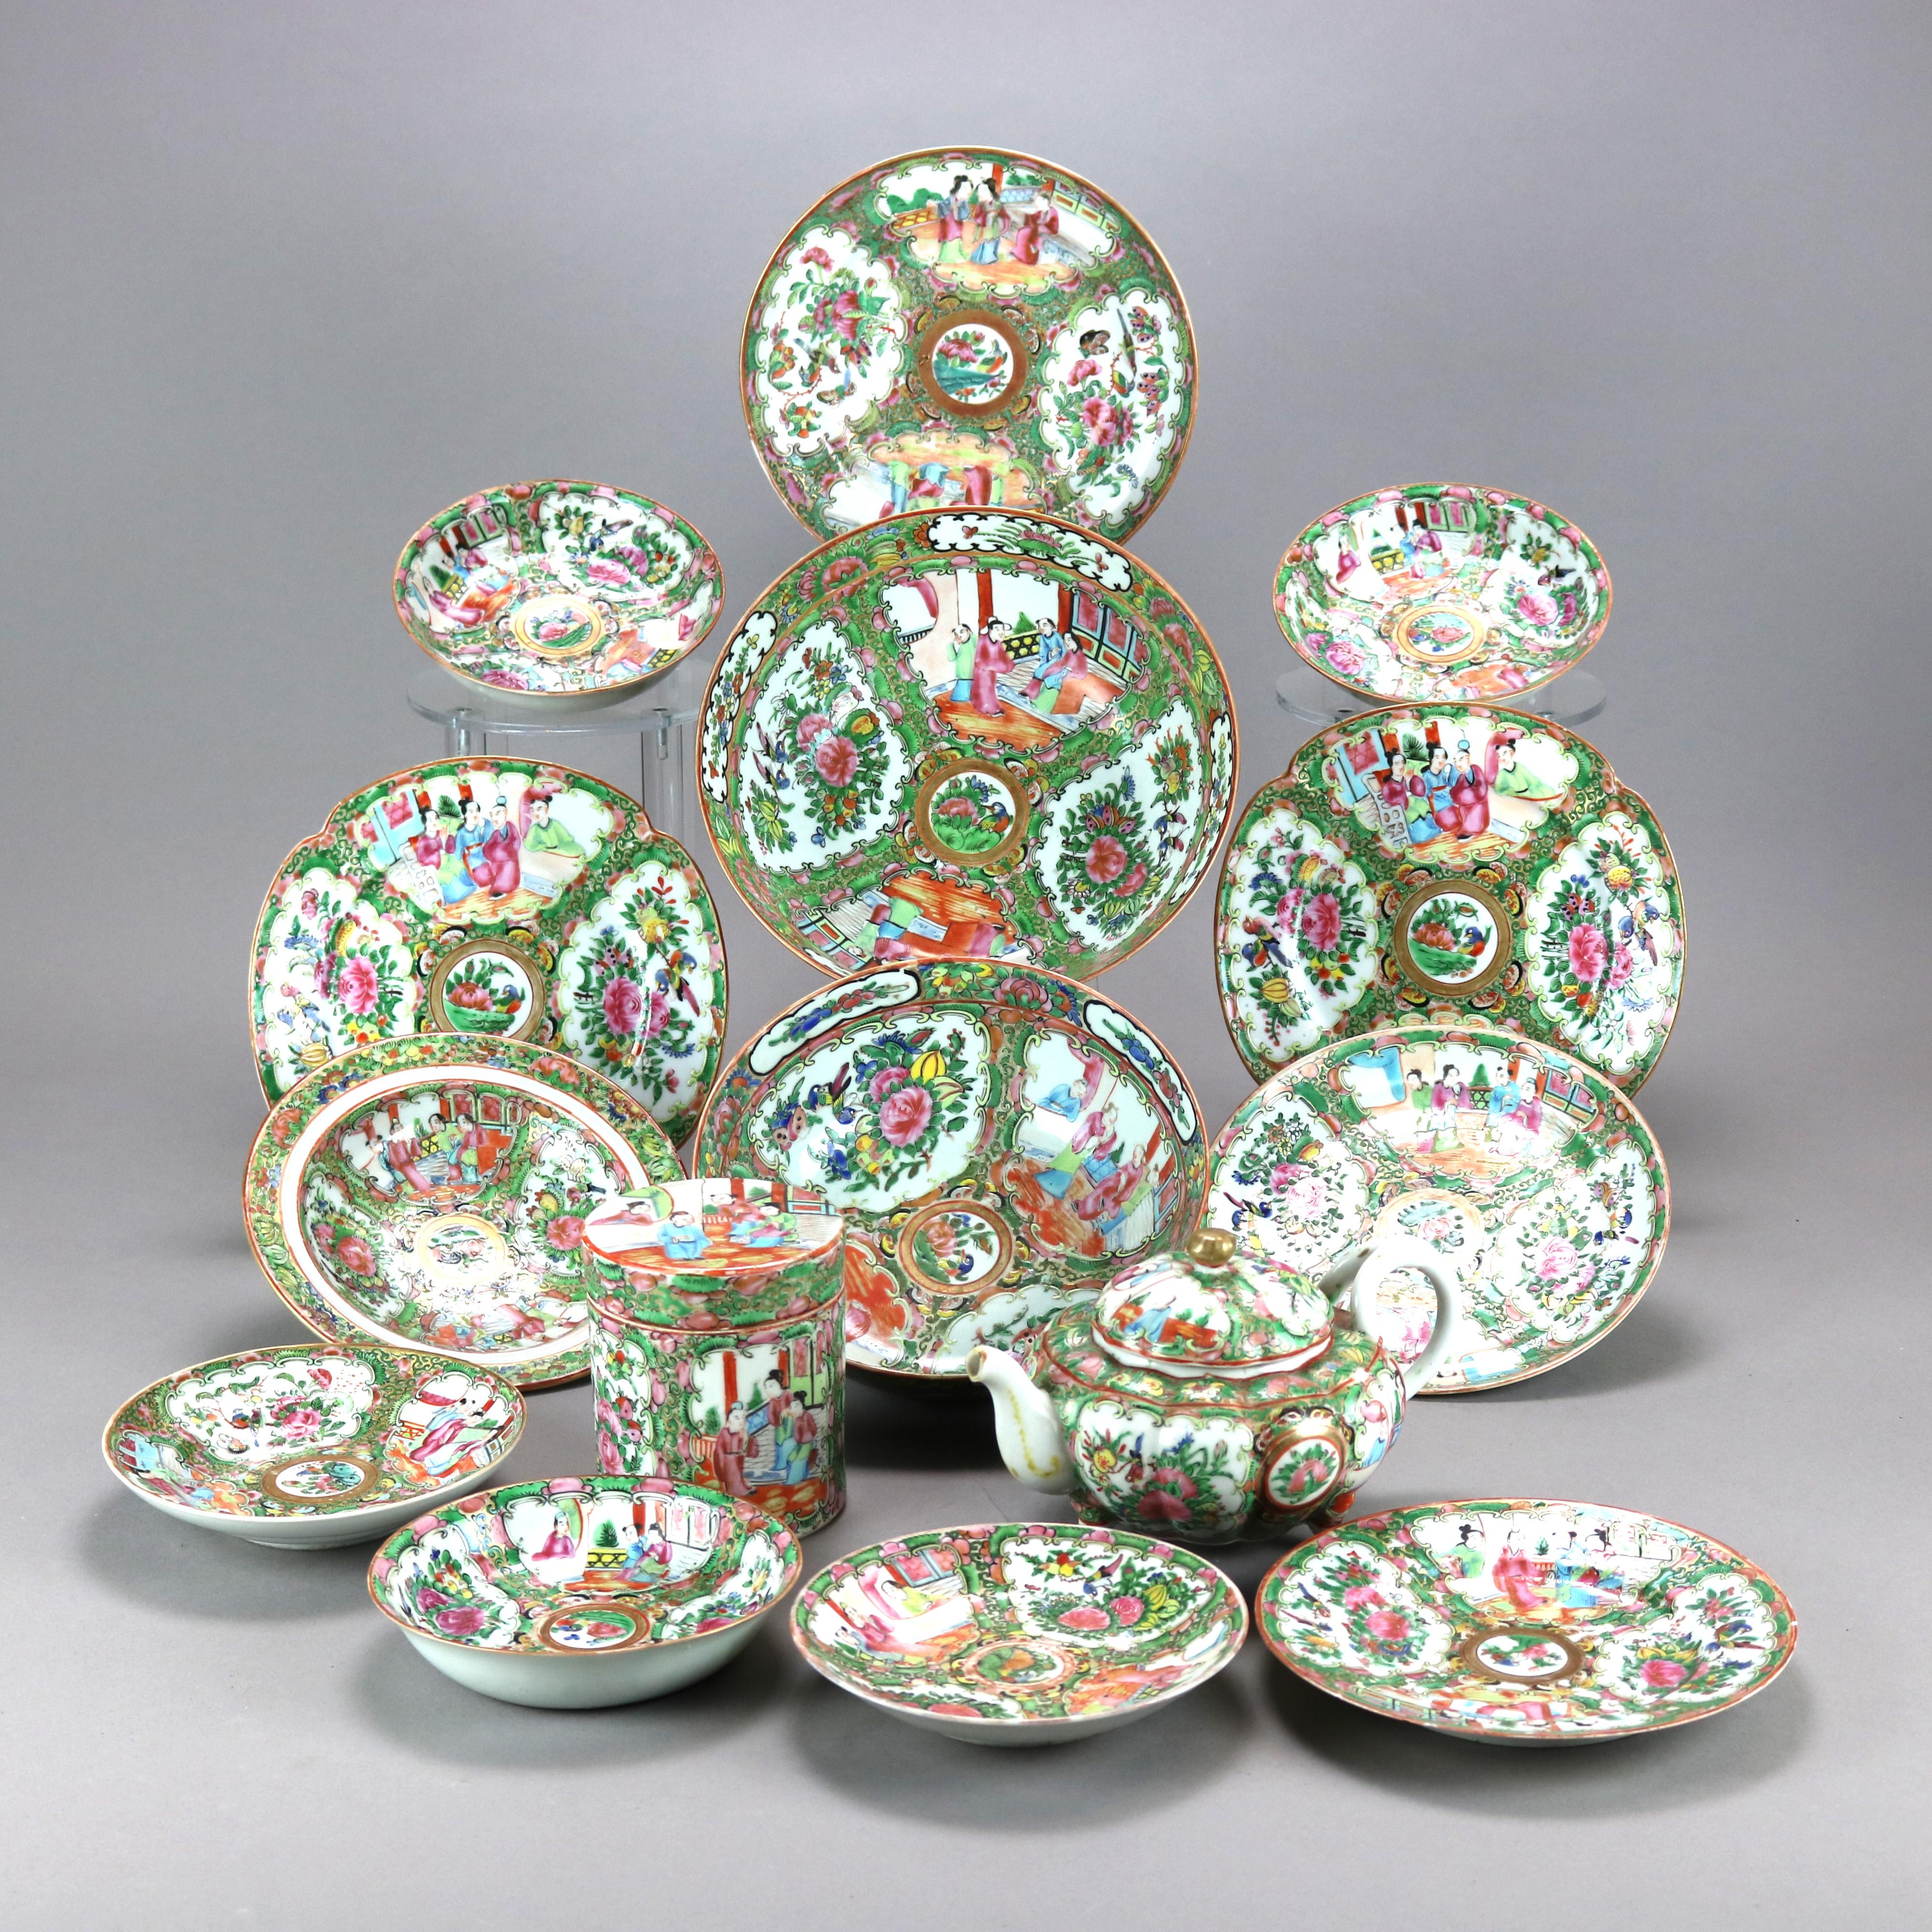 Enameled Antique Group of Fifteen Chinese Rose Medallion Porcelain Dining Pieces, c1900